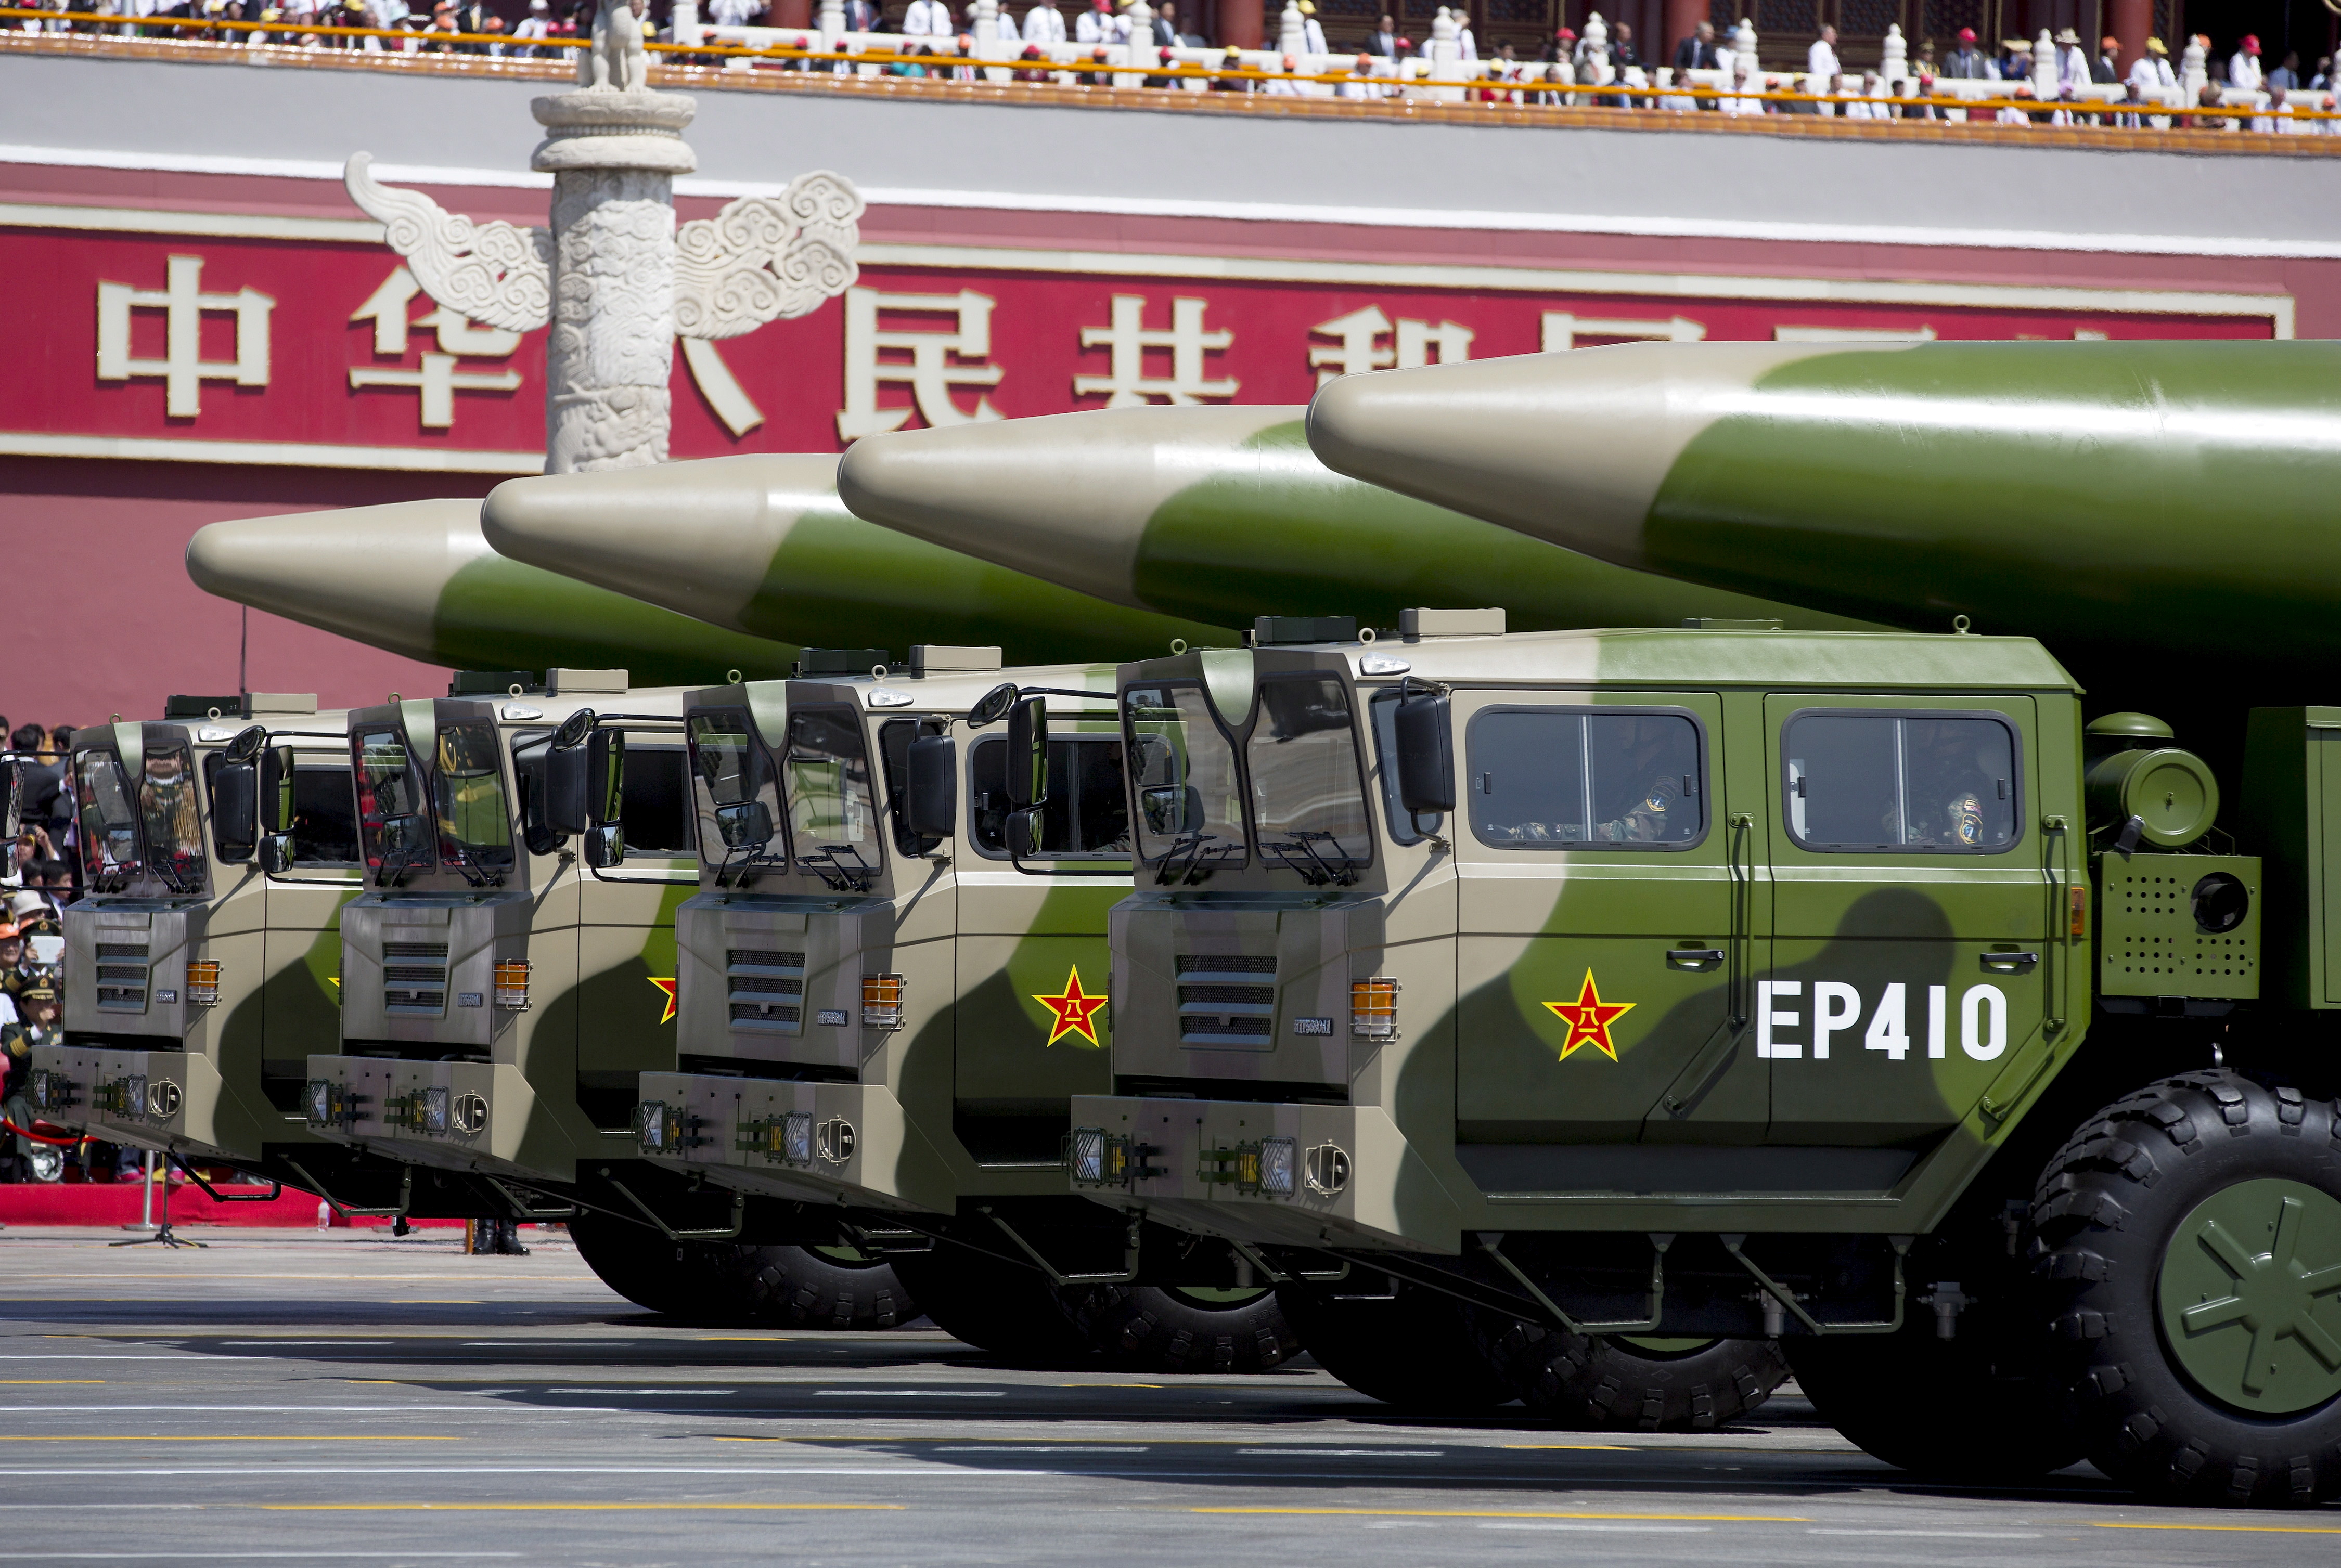 Military vehicles carrying DF-26 ballistic missiles travel past Tiananmen Gate during a military parade to commemorate the 70th anniversary of the end of World War II in Beijing